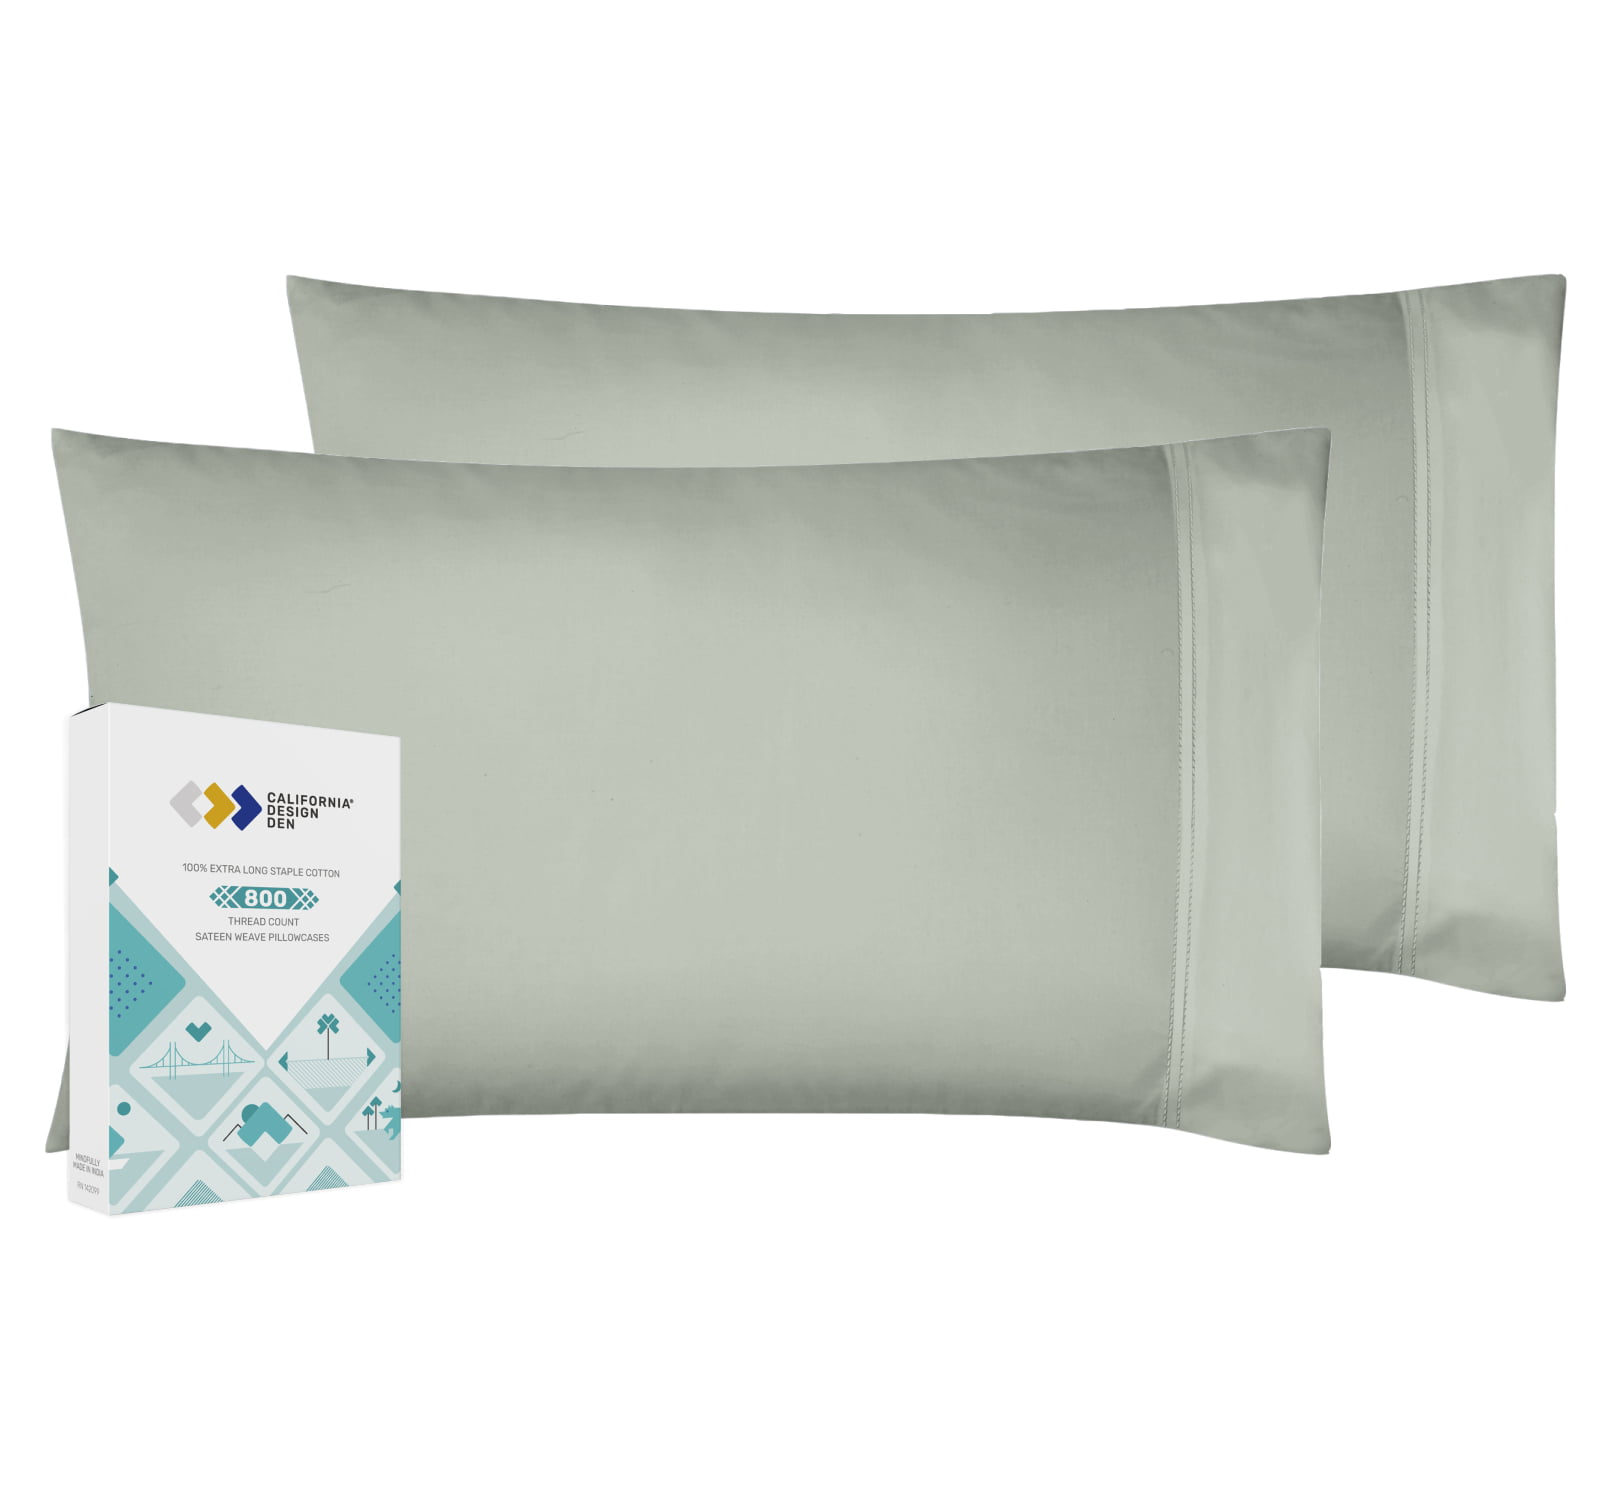 Pizuna 800 Thread Count Cotton White Standard Pillowcases White Standard Size 100% Cotton Pillow Cases 100% Long Staple Cotton Smooth Sateen Pillow Cases Thickly Woven Set of 2 Pillow Covers